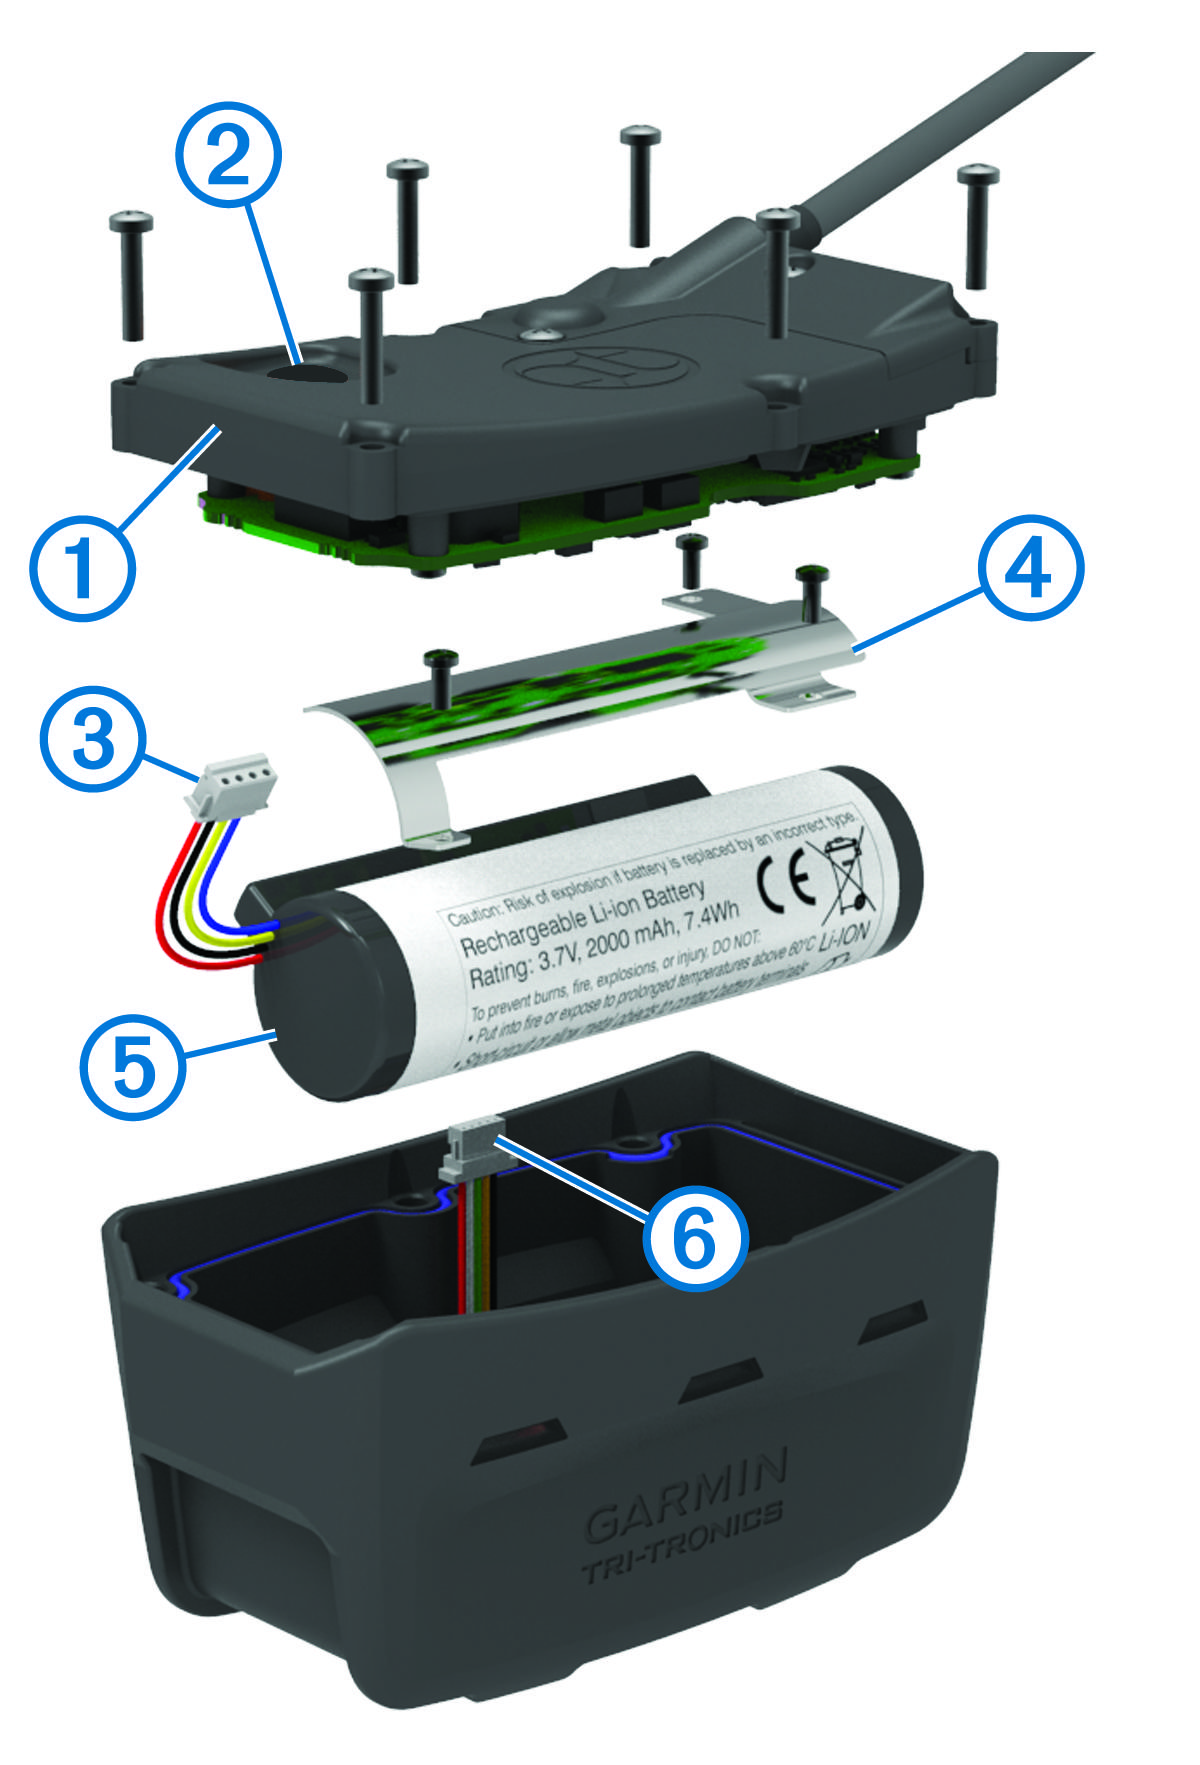 Diagram of the dog collar device battery being installed with callouts